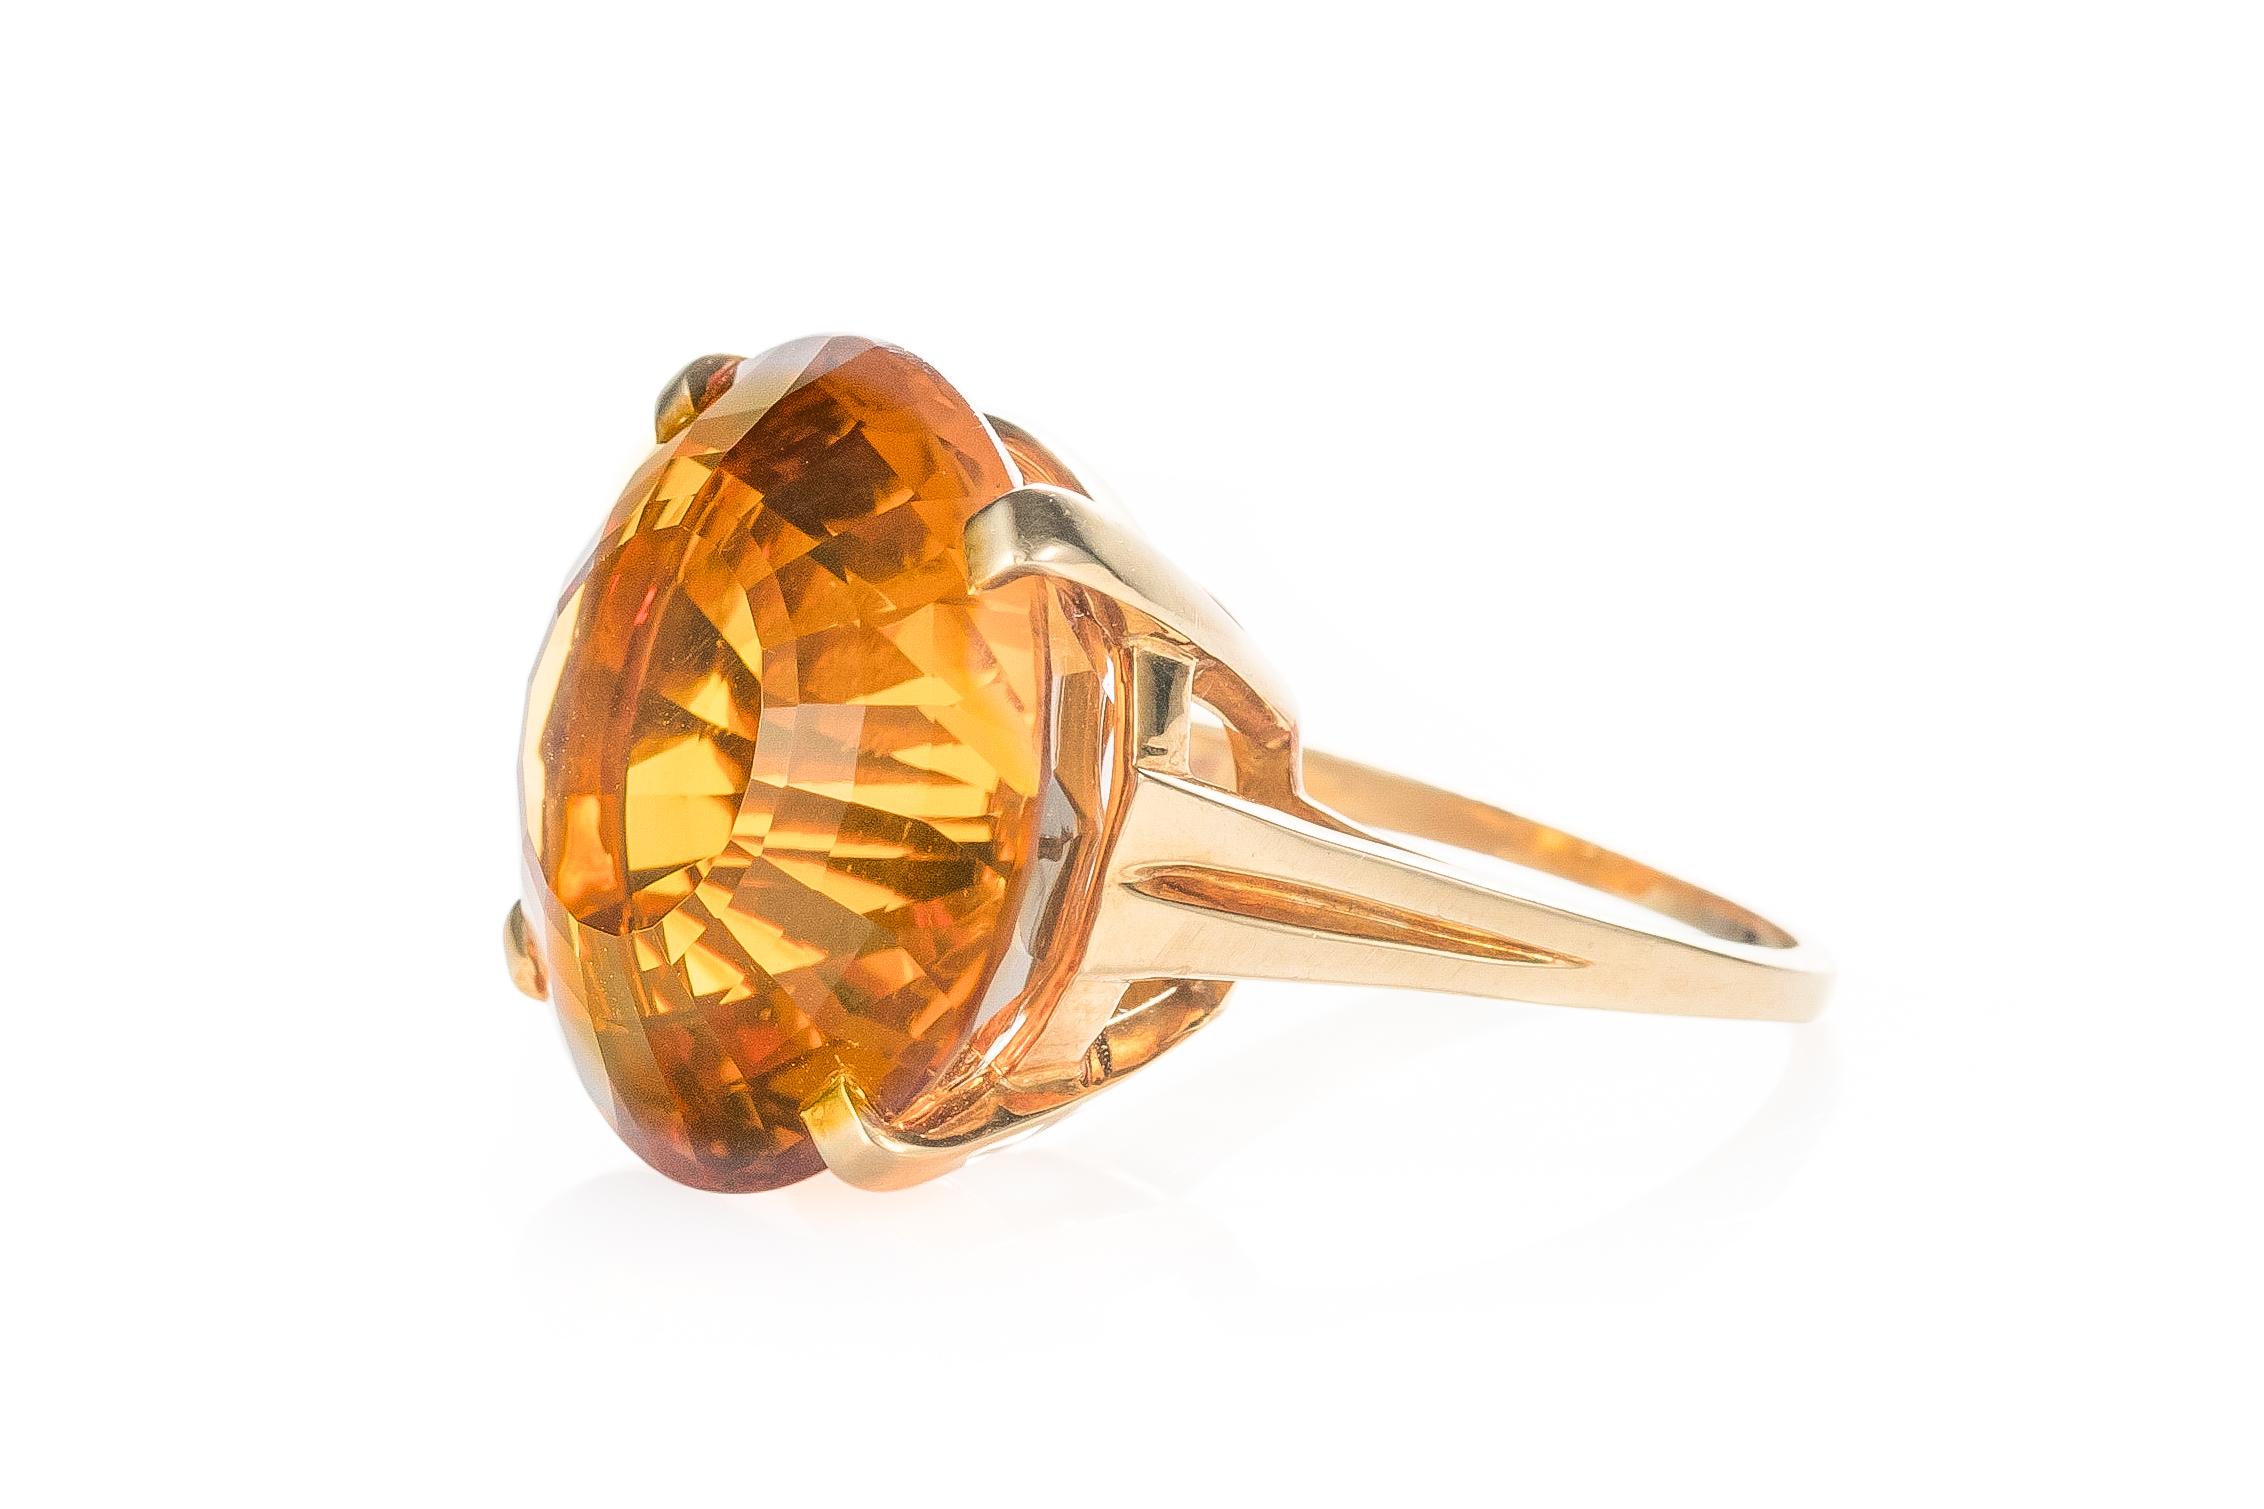 Item Details
Metal type: 18 Karat Yellow Gold
Weight: 15 grams
Fits ring Size: 6 (resizable)

Features a stunning 14 carat Round Intense Orange Citrine 
Made by Tiffany & Co in the 1980s 